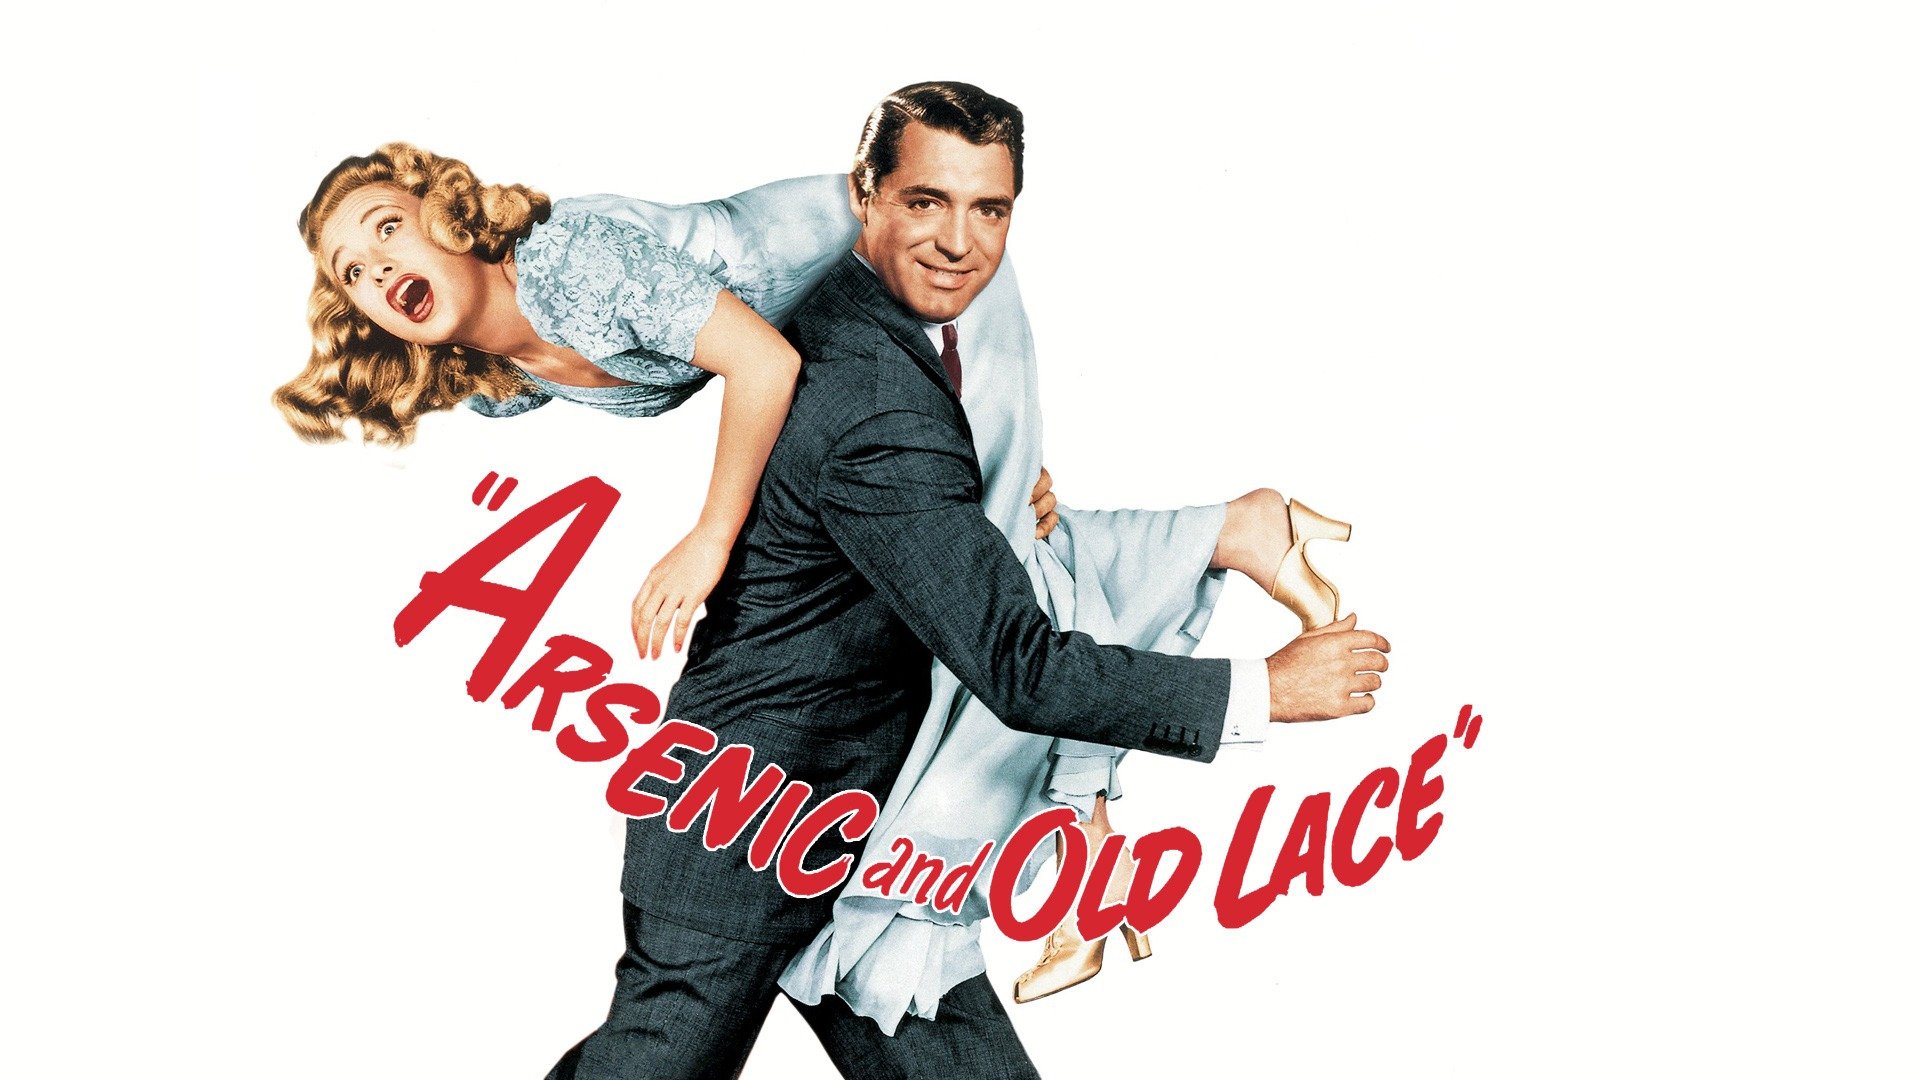 arsenic and old lace movie